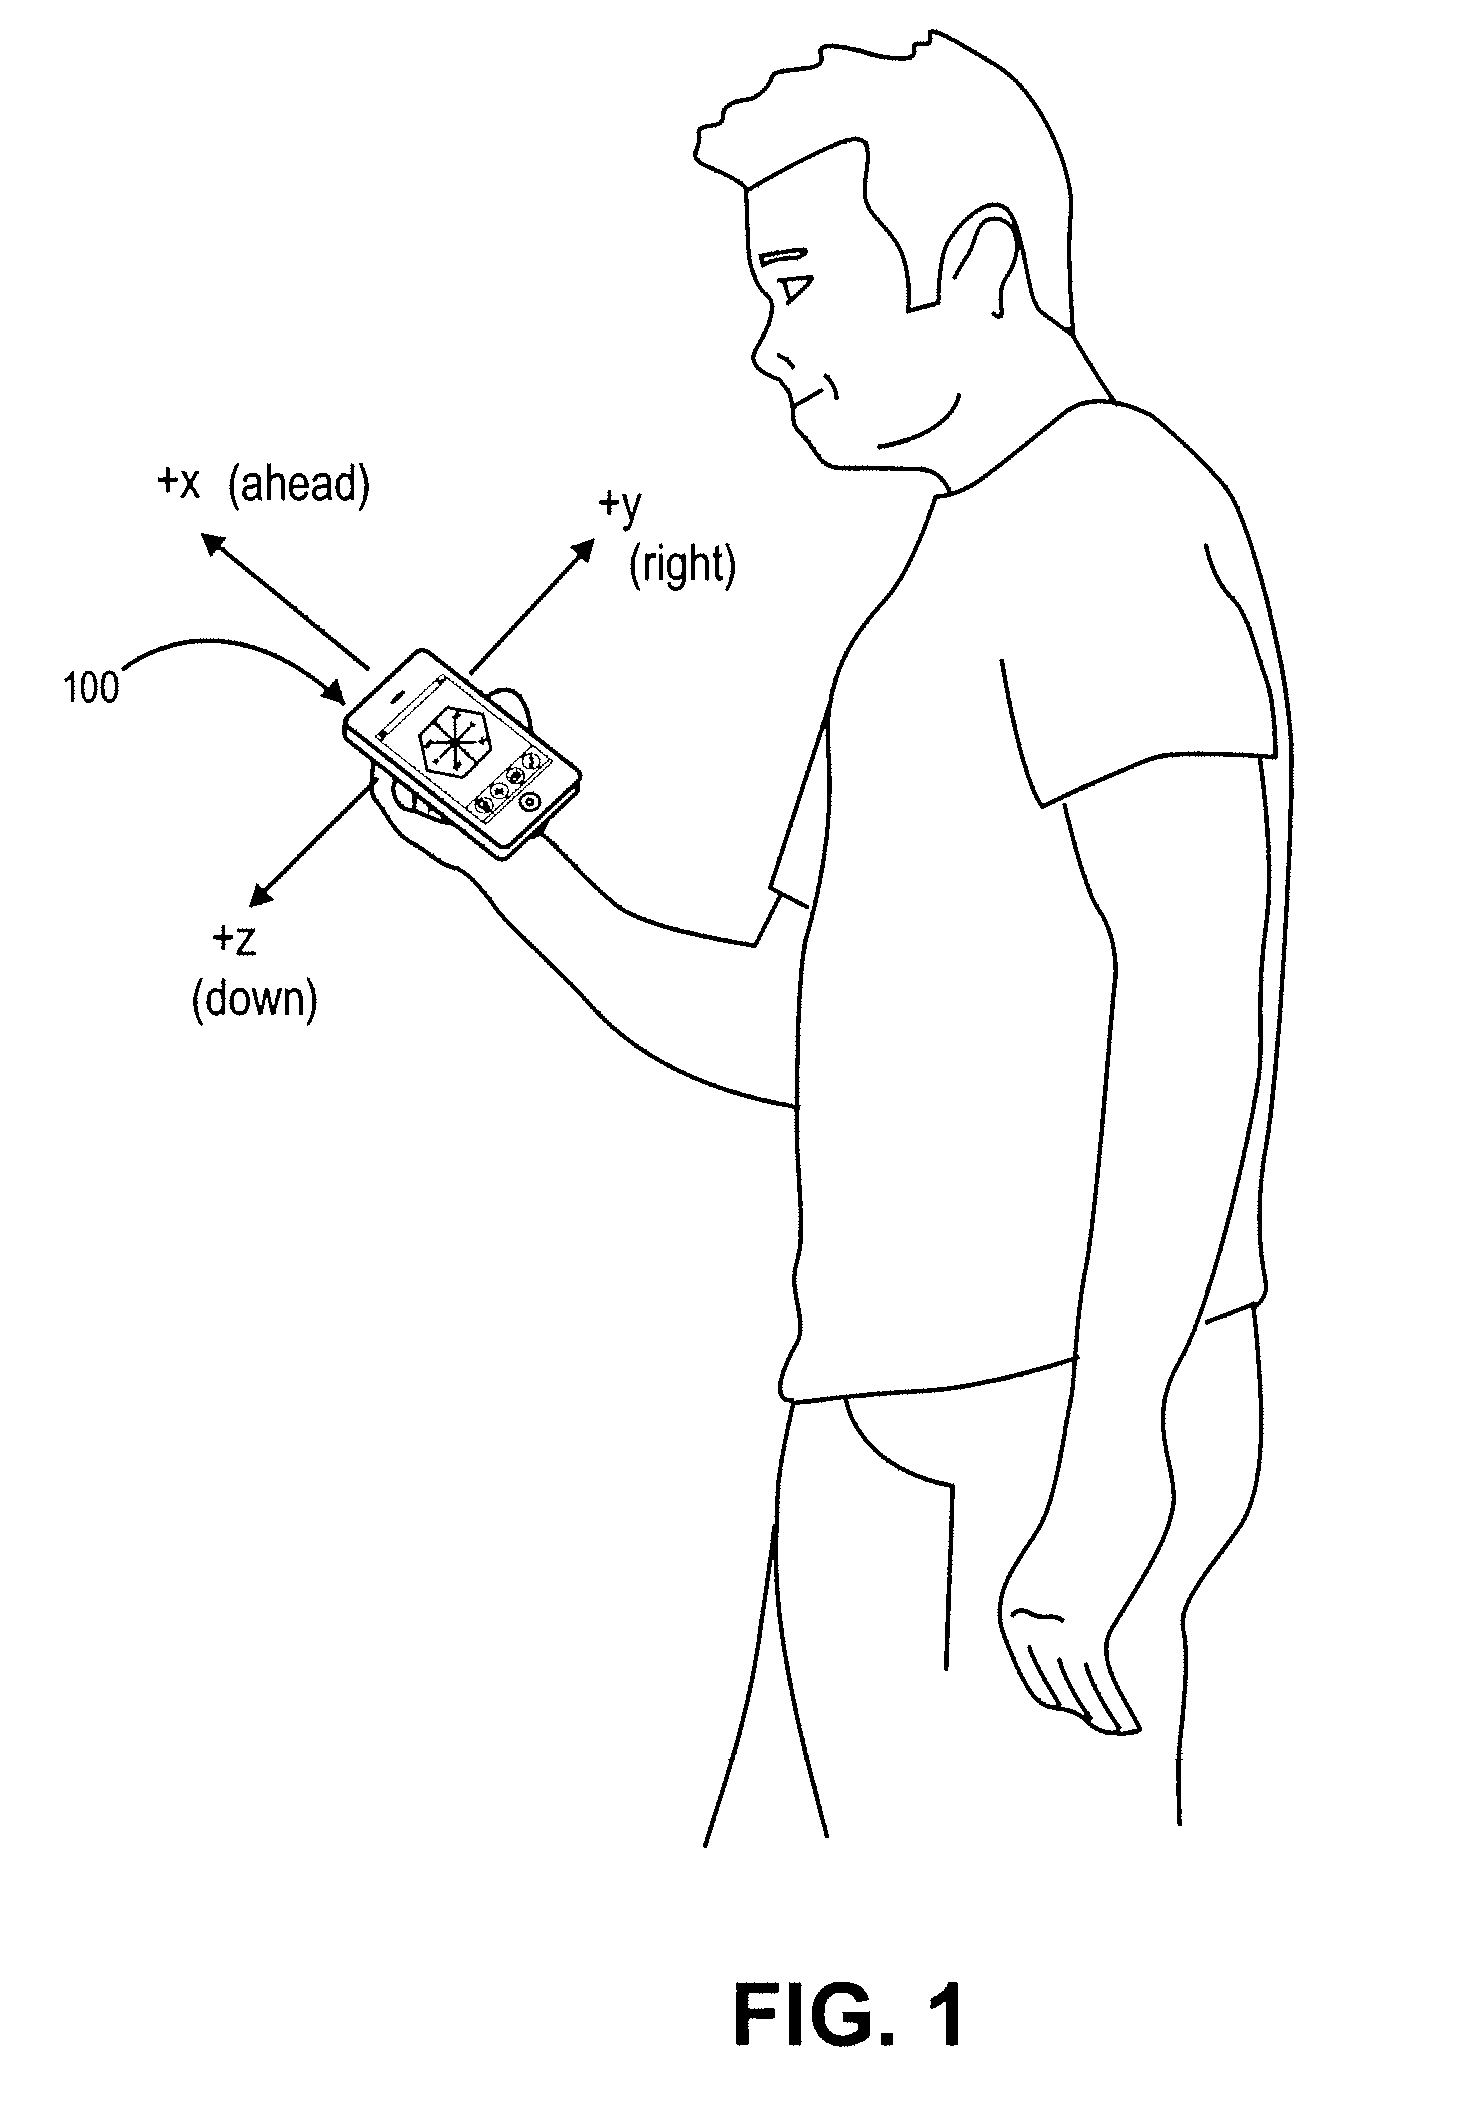 Accuracy indications for an electronic compass in a portable device